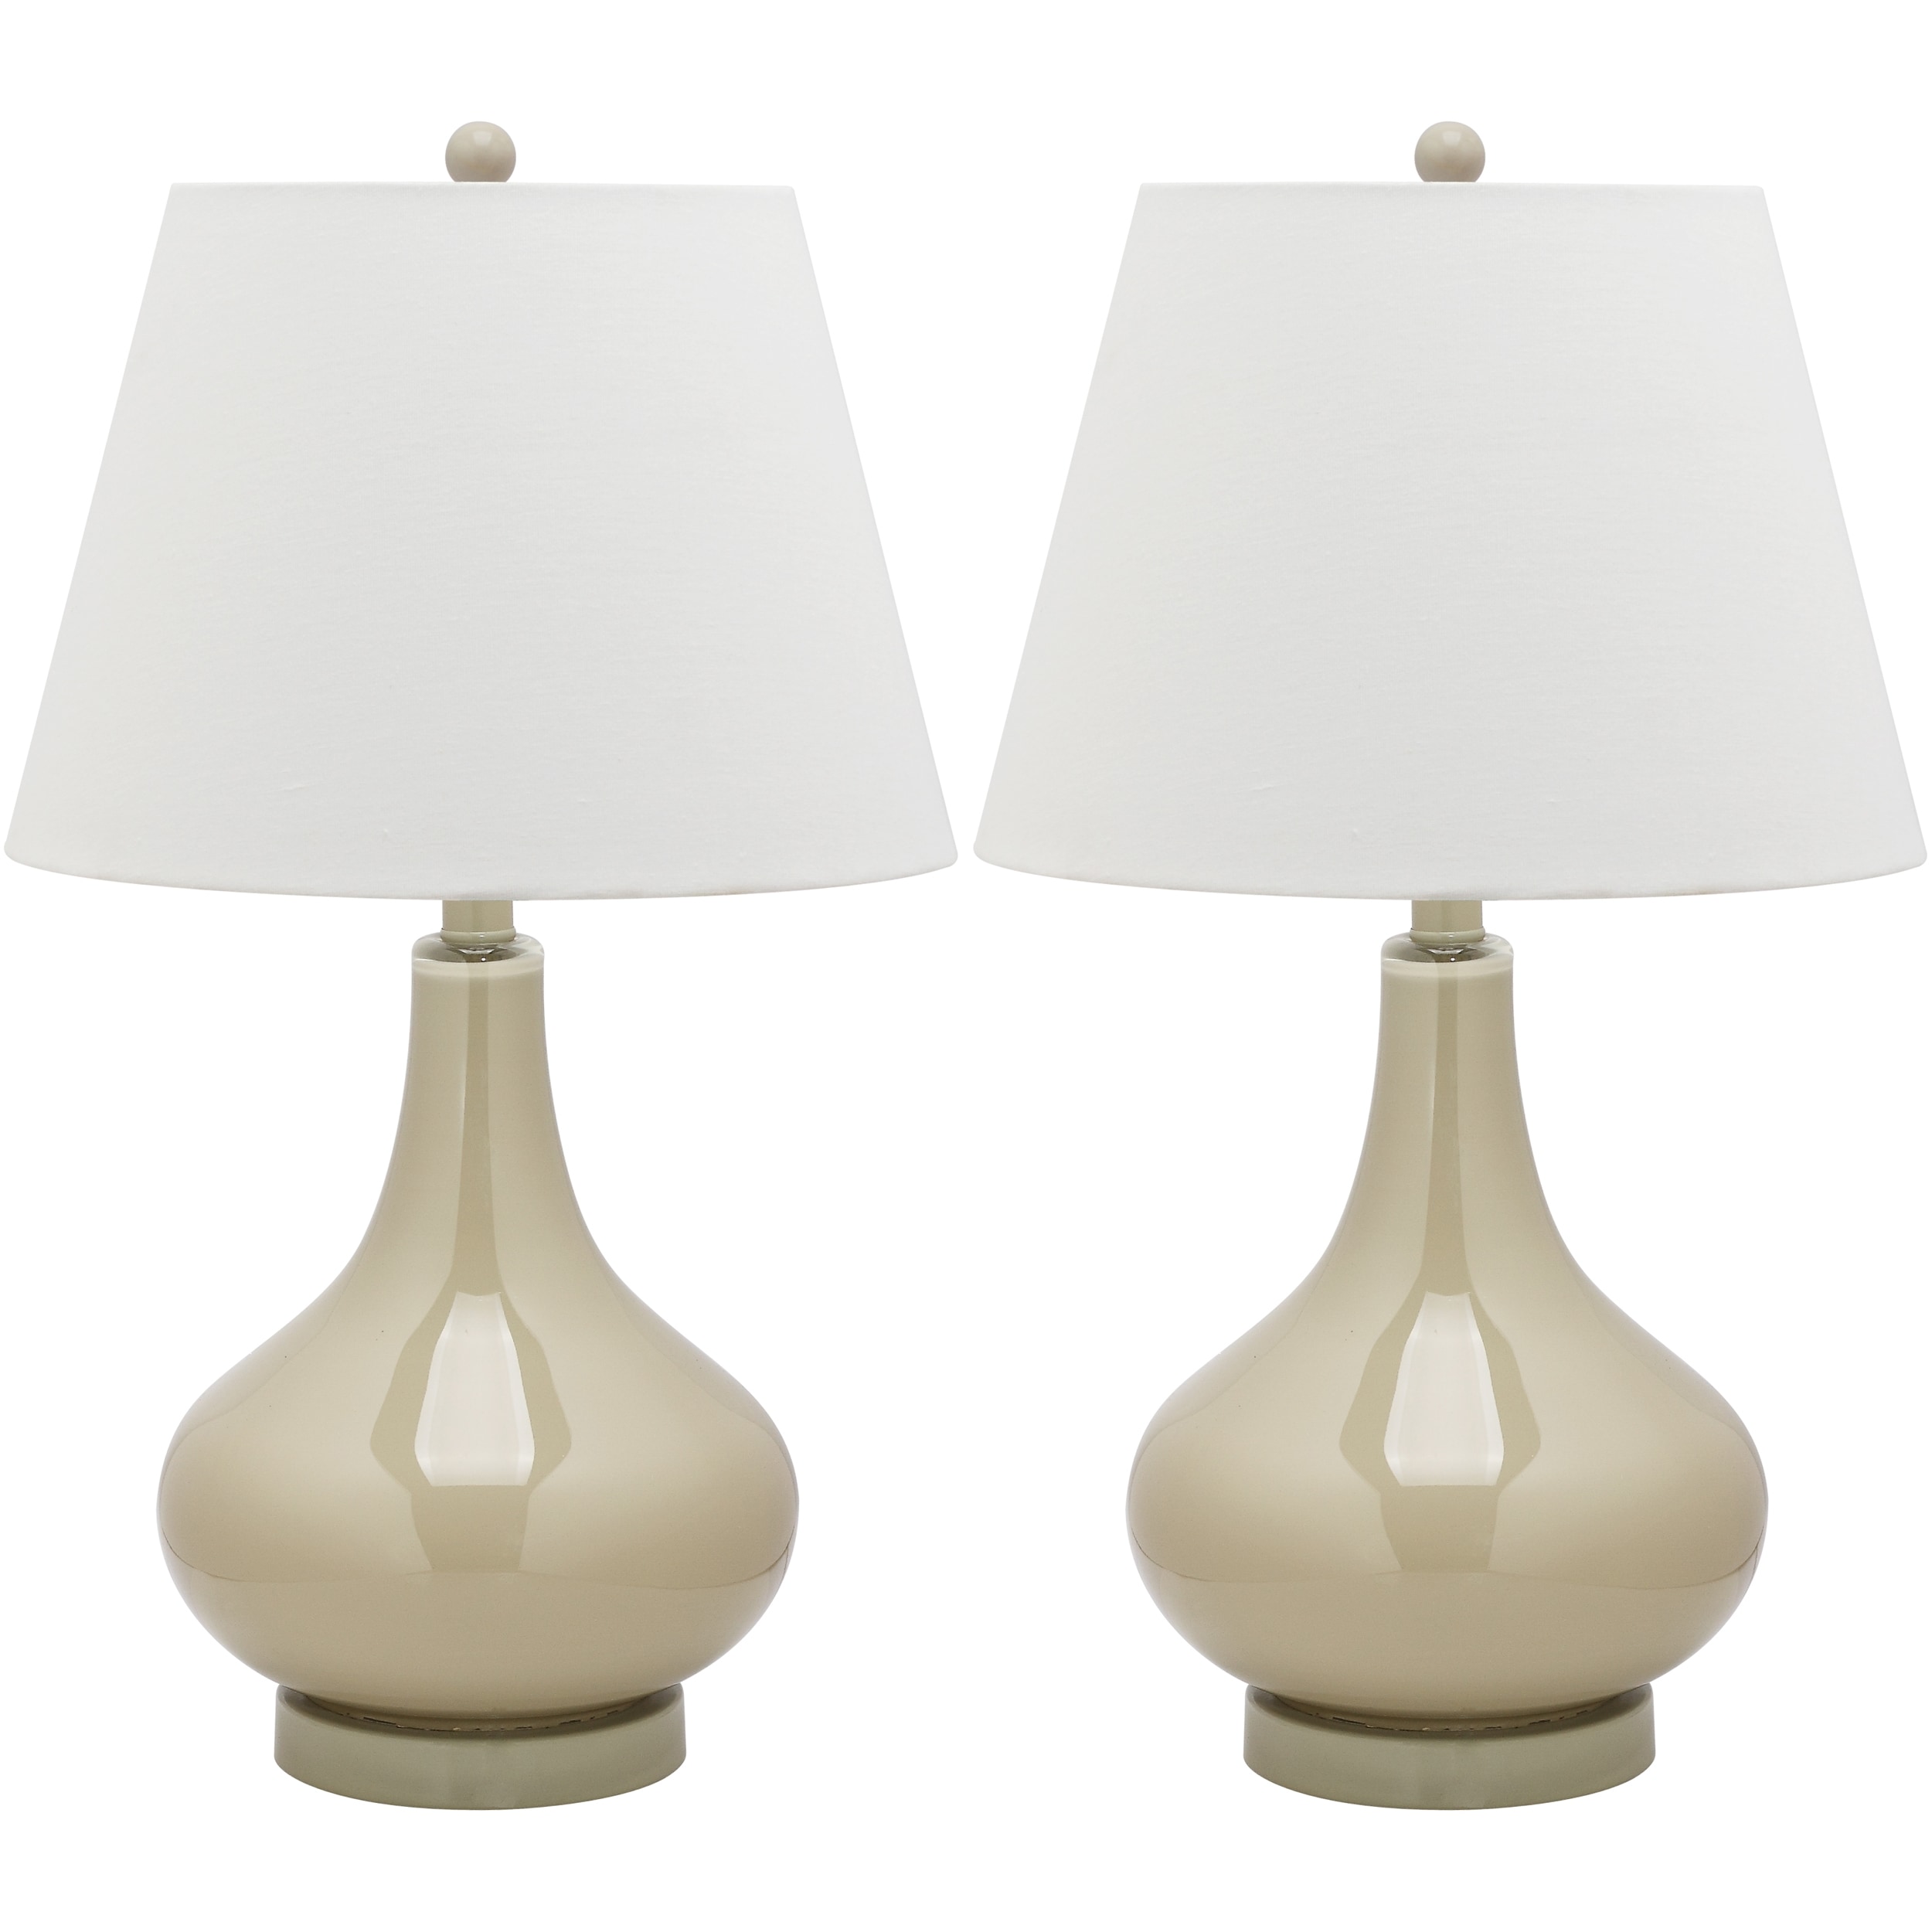 Lamps (Set of 2) Today $197.69 Sale $177.92 Save 10%